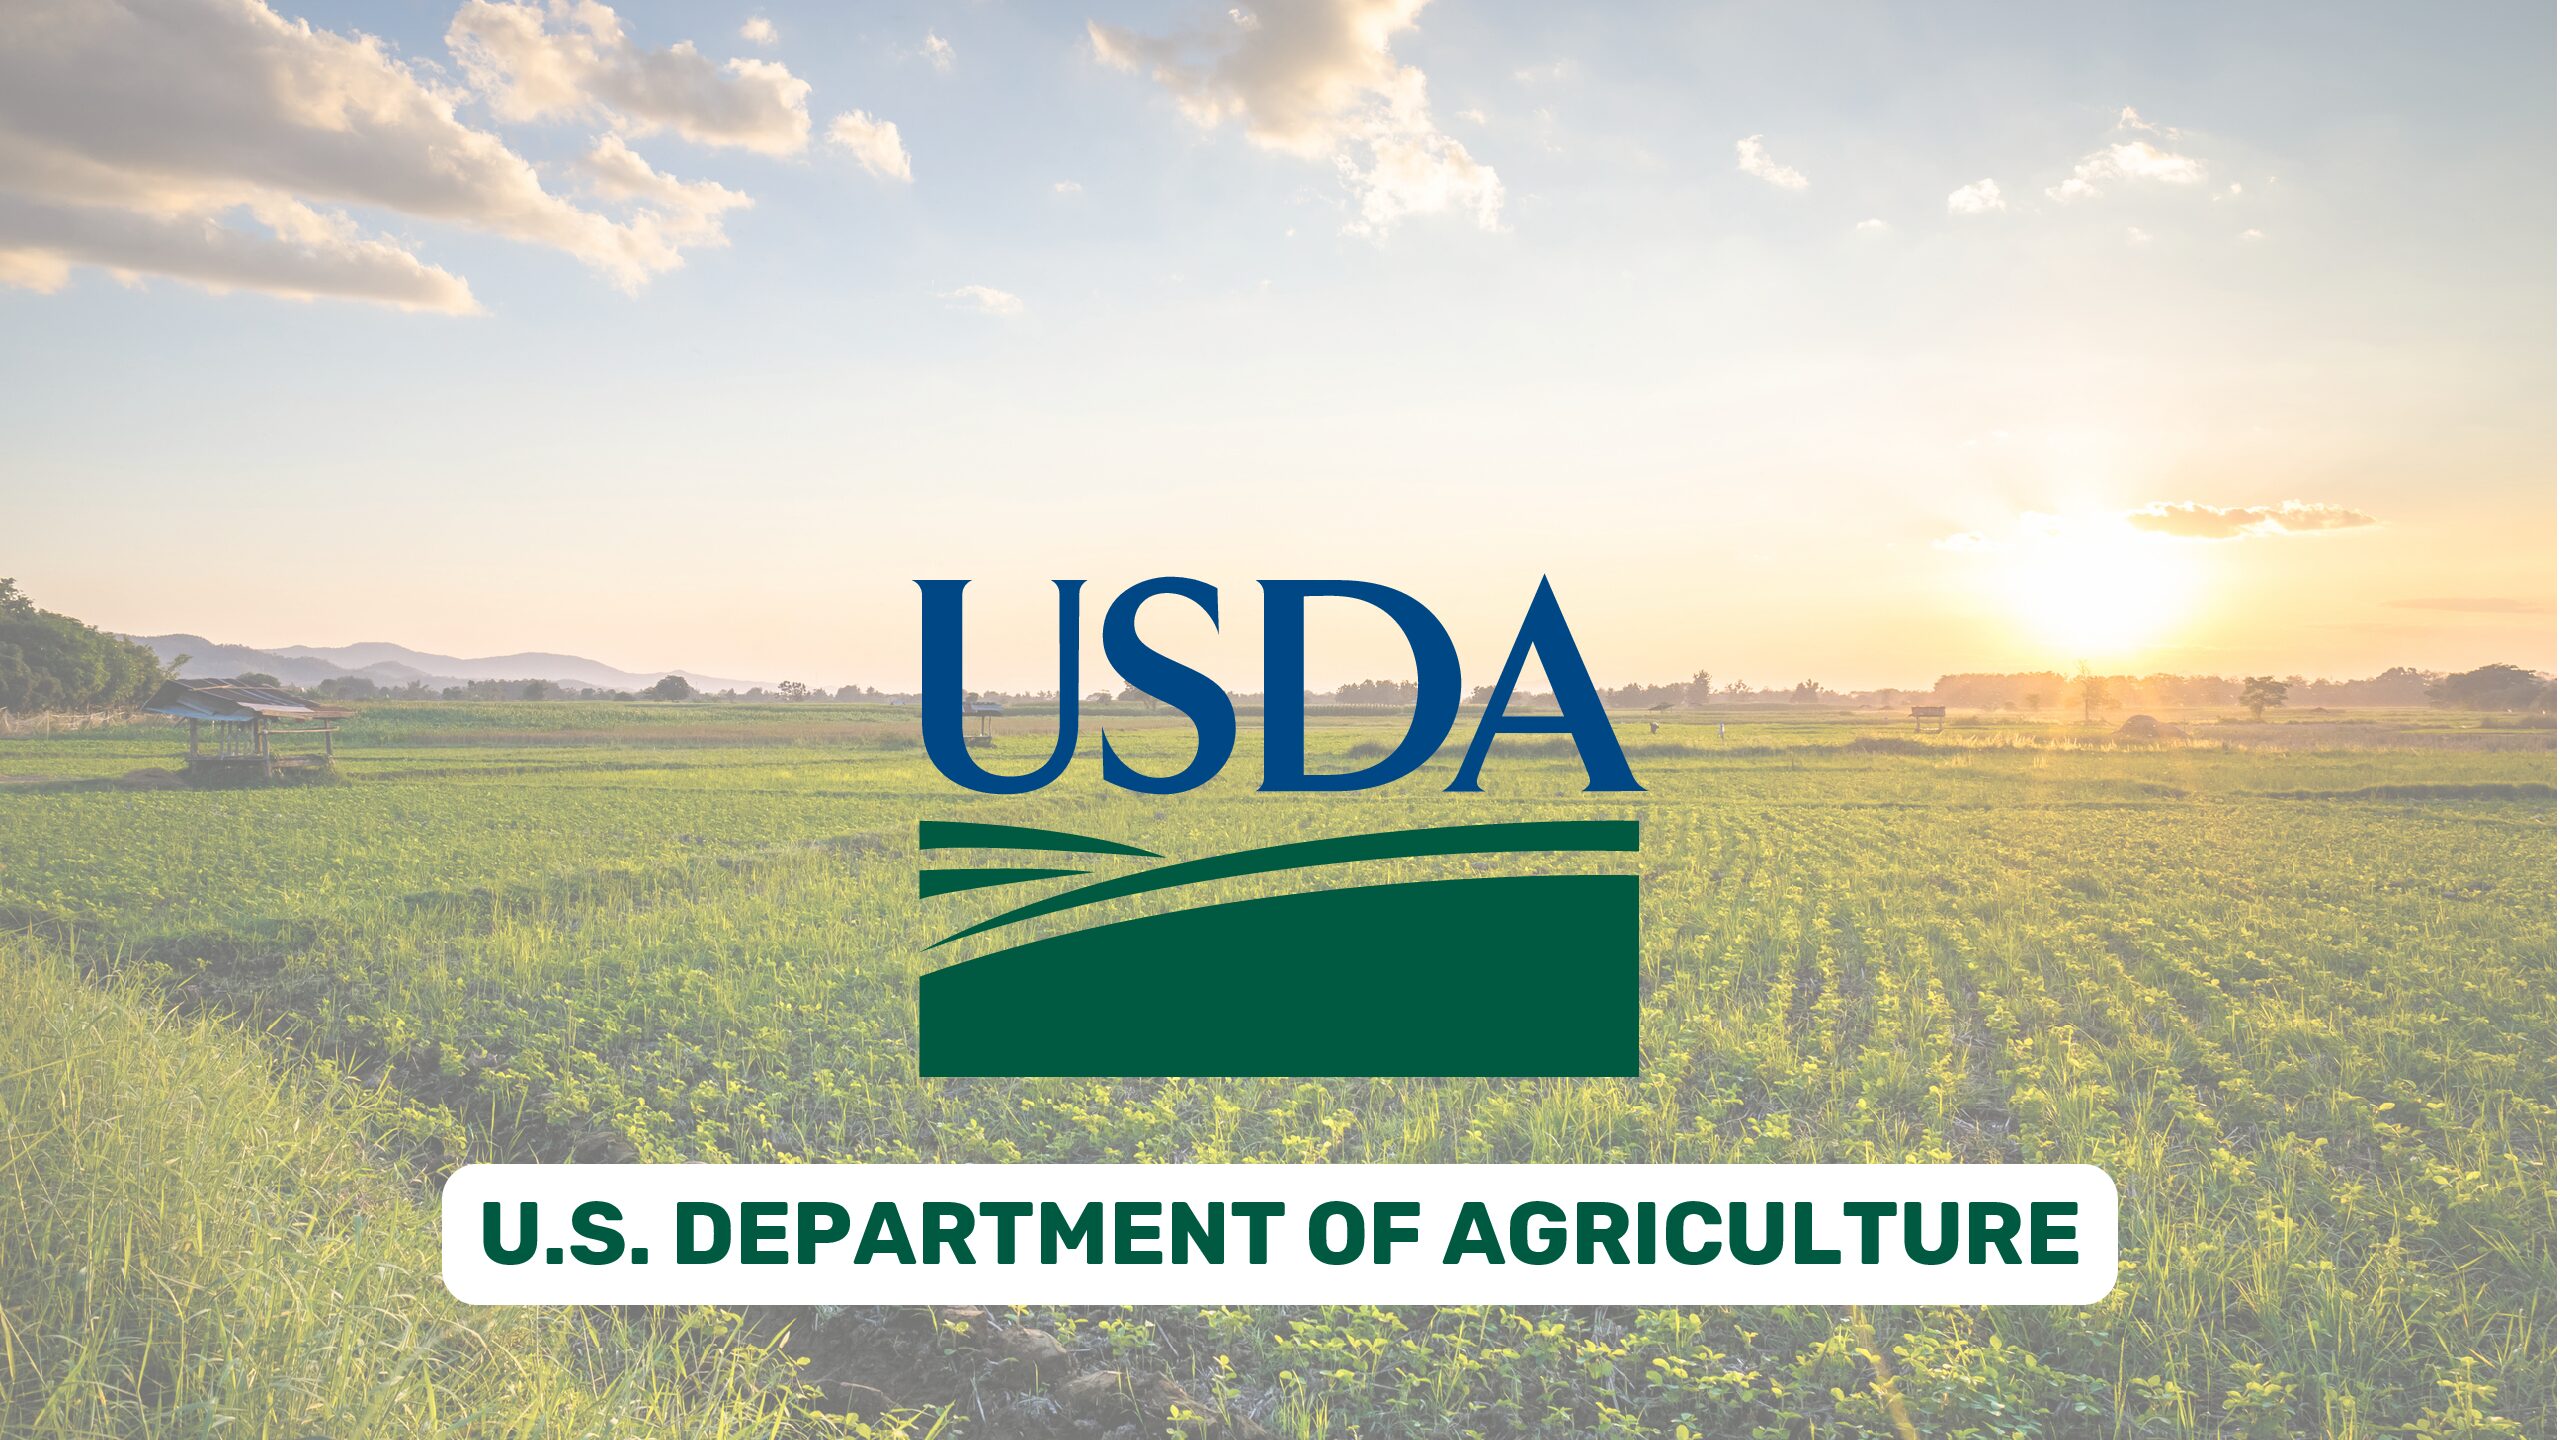 USDA | Application Period for Composting and Food Waste Reduction Cooperative Agreements Open